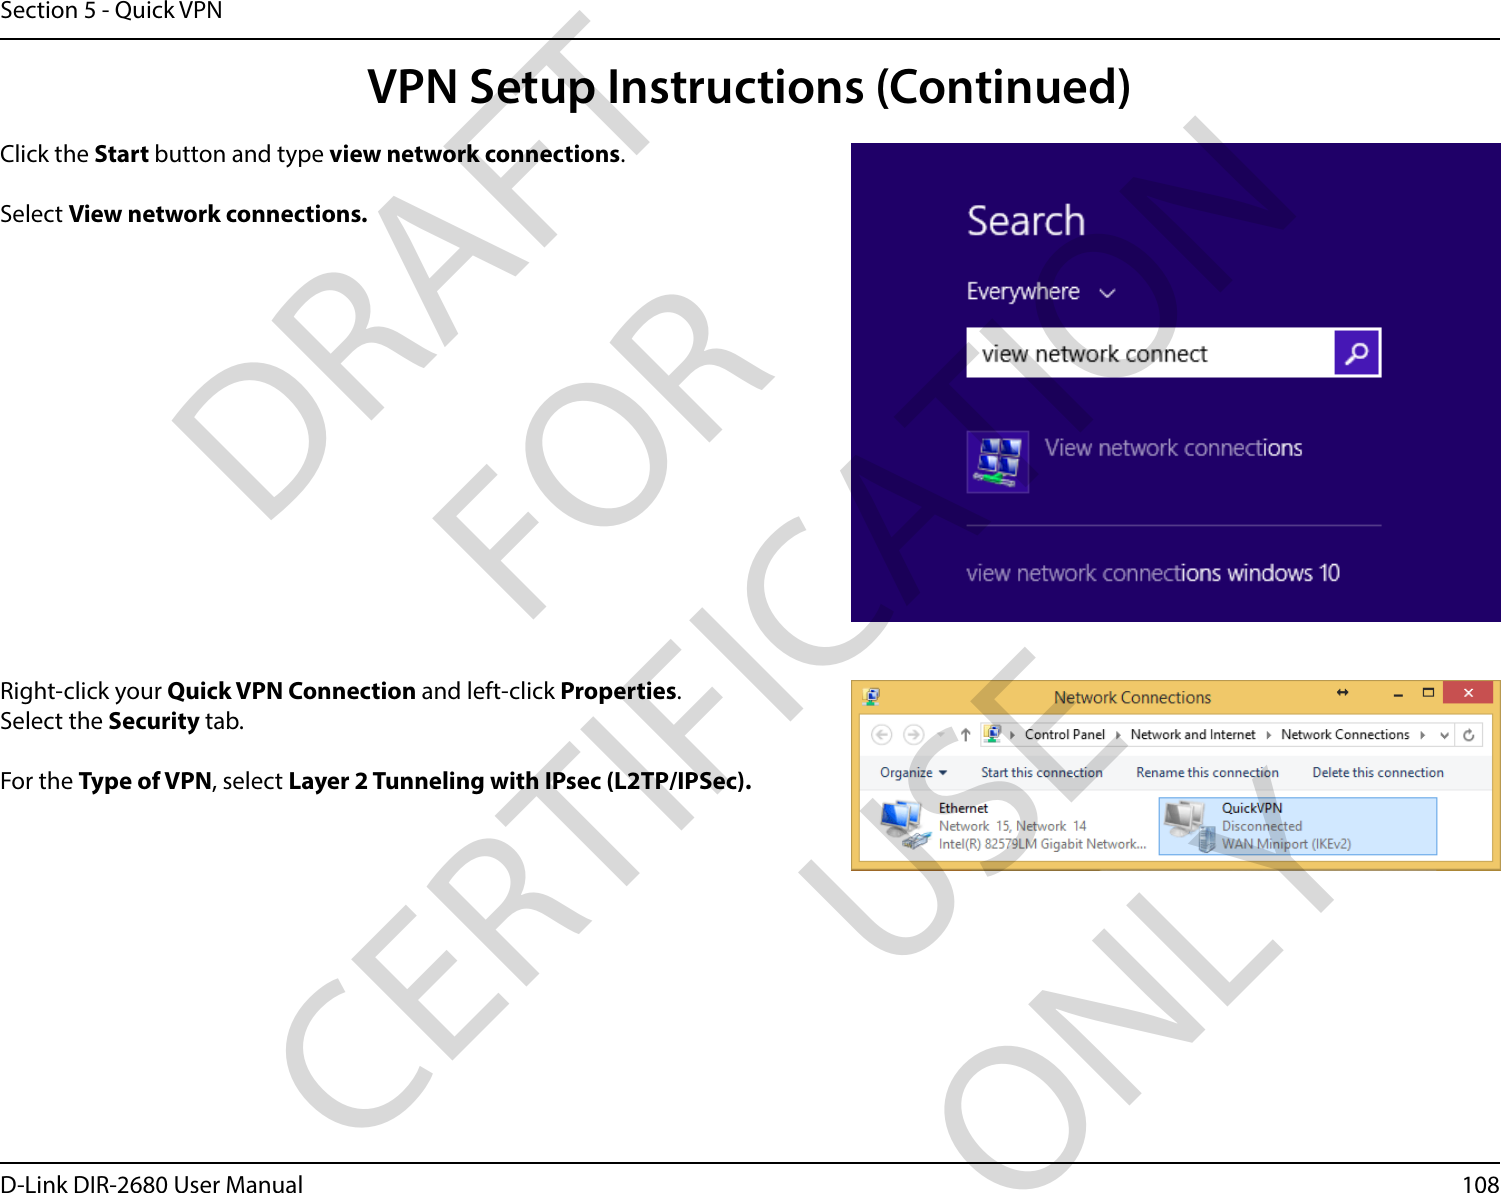 108D-Link DIR-2680 User ManualSection 5 - Quick VPNClick the Start button and type view network connections.Select View network connections.Right-click your Quick VPN Connection and left-click Properties. Select the Security tab. For the Type of VPN, select Layer 2 Tunneling with IPsec (L2TP/IPSec).VPN Setup Instructions (Continued)DRAFT FOR CERTIFICATION USE ONLY